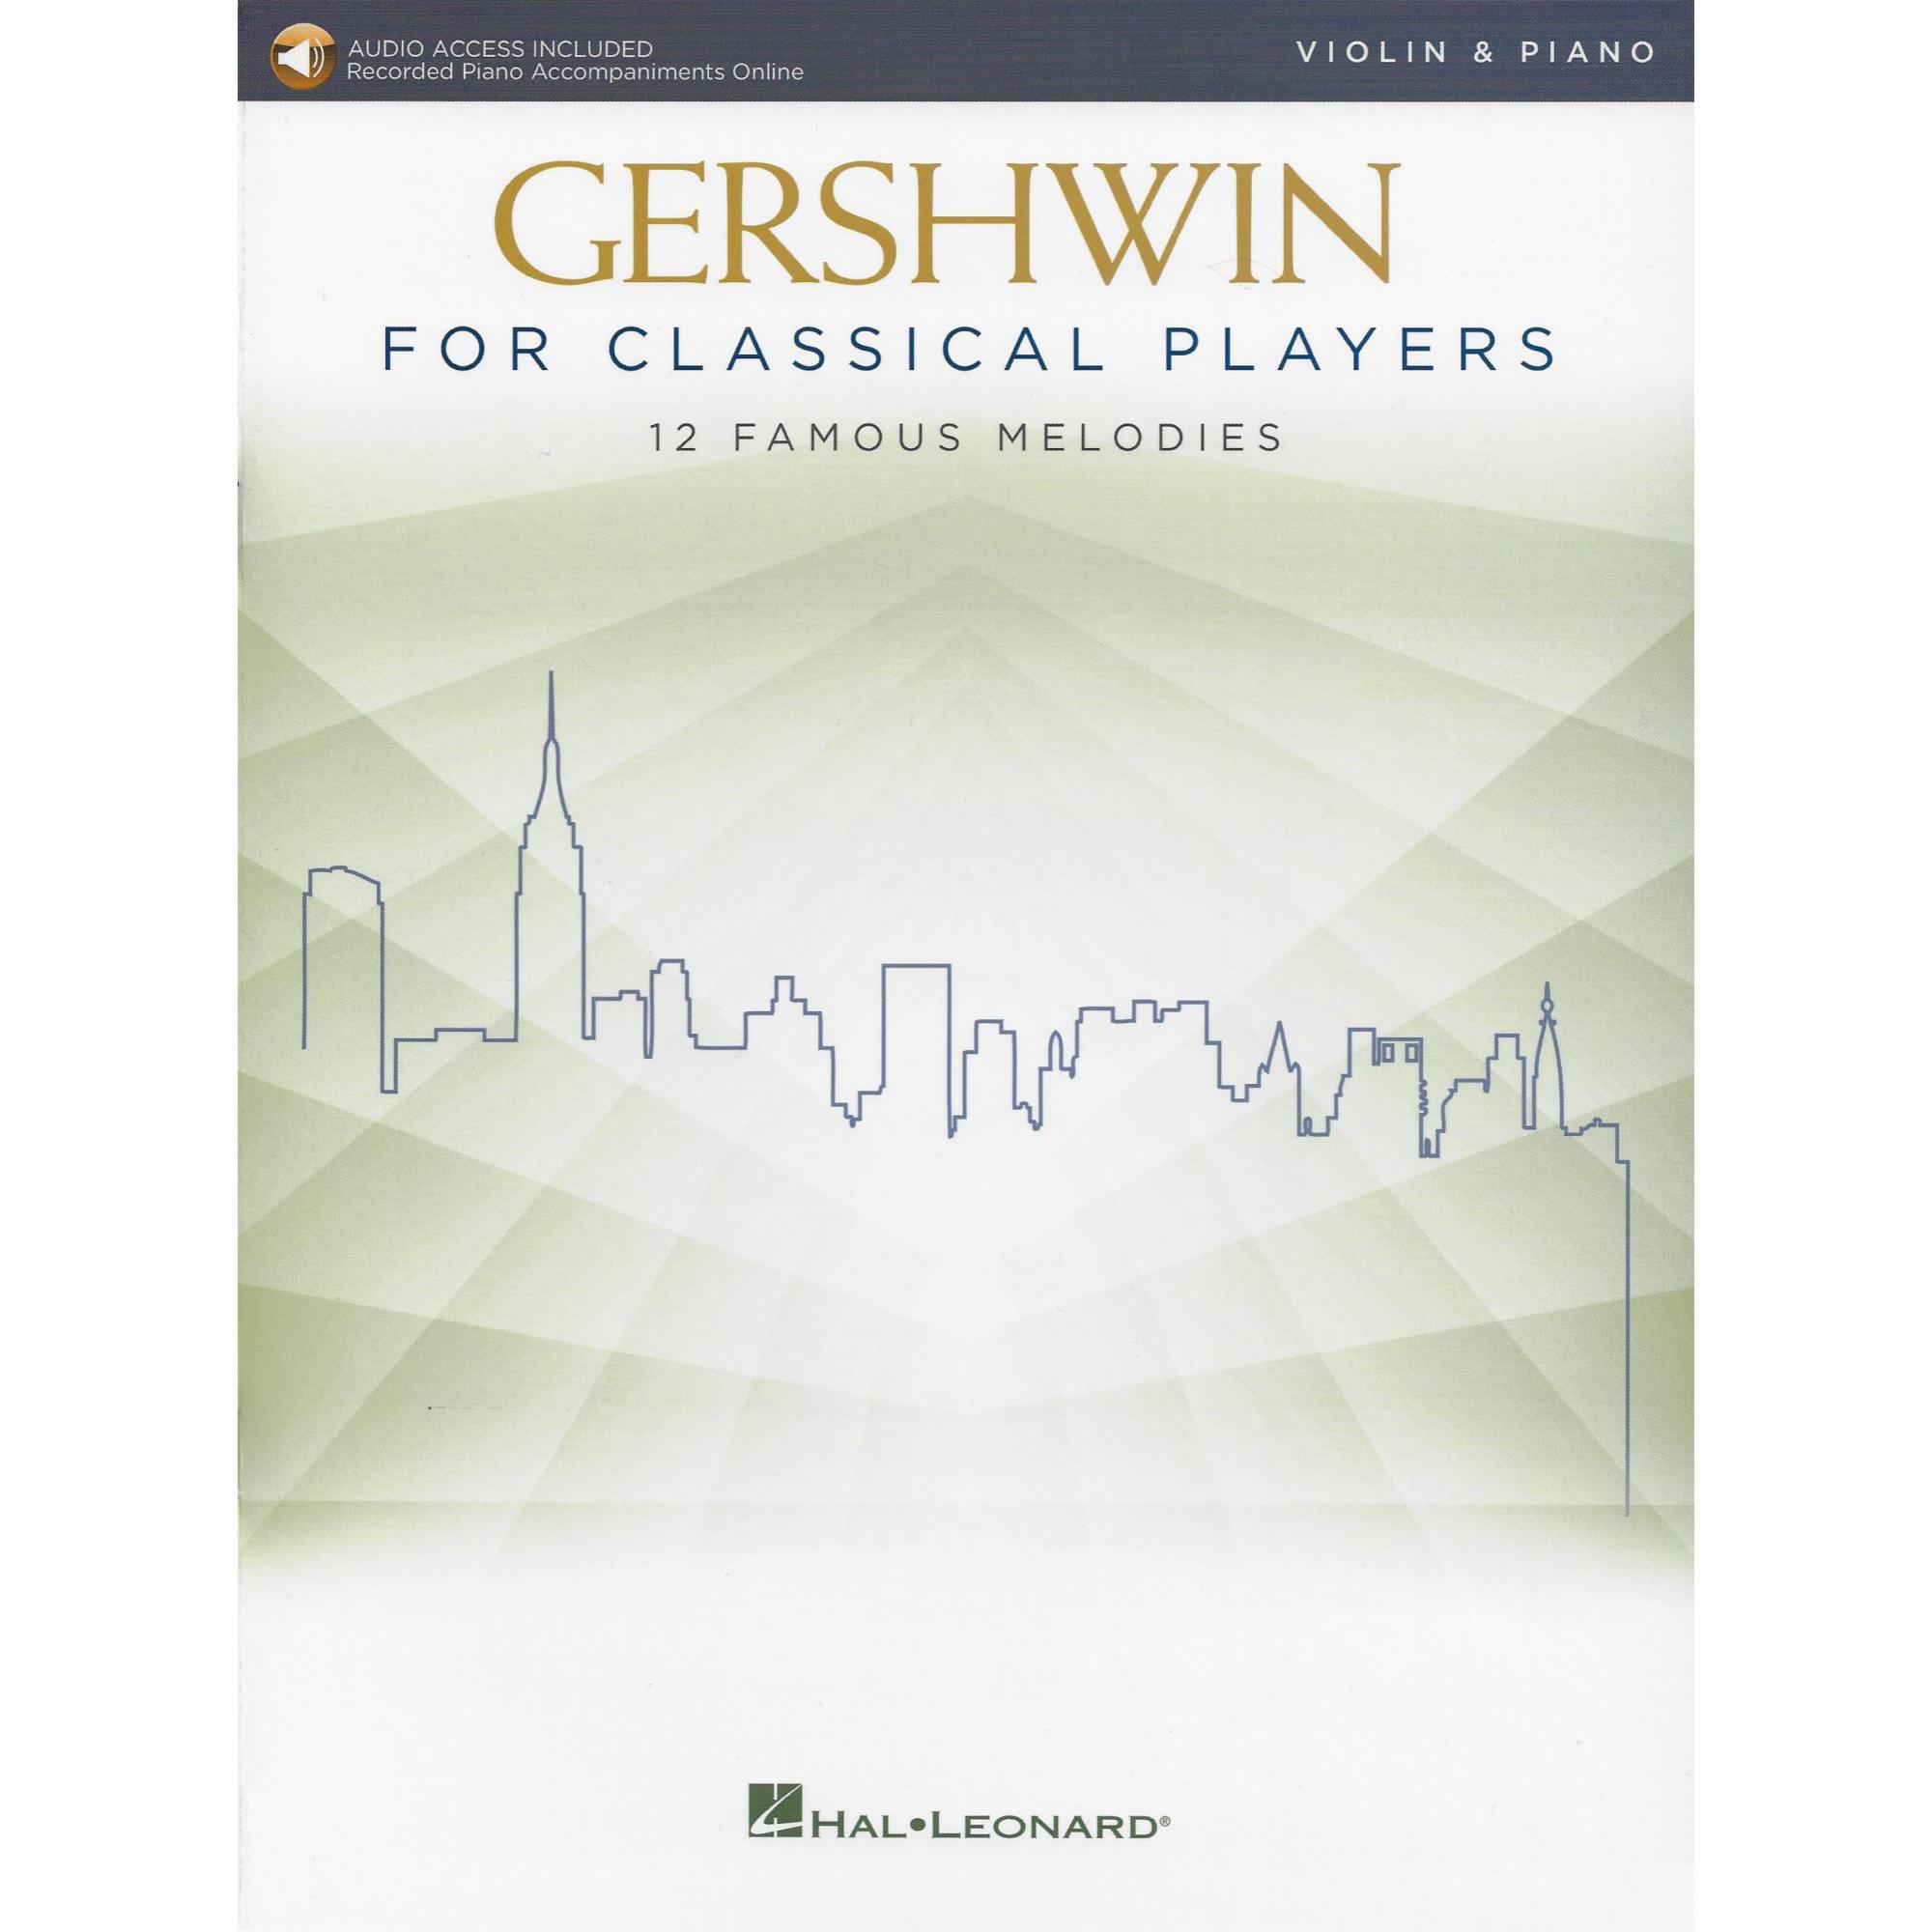 Gershwin for Classical Players for Violin or Cello and Piano